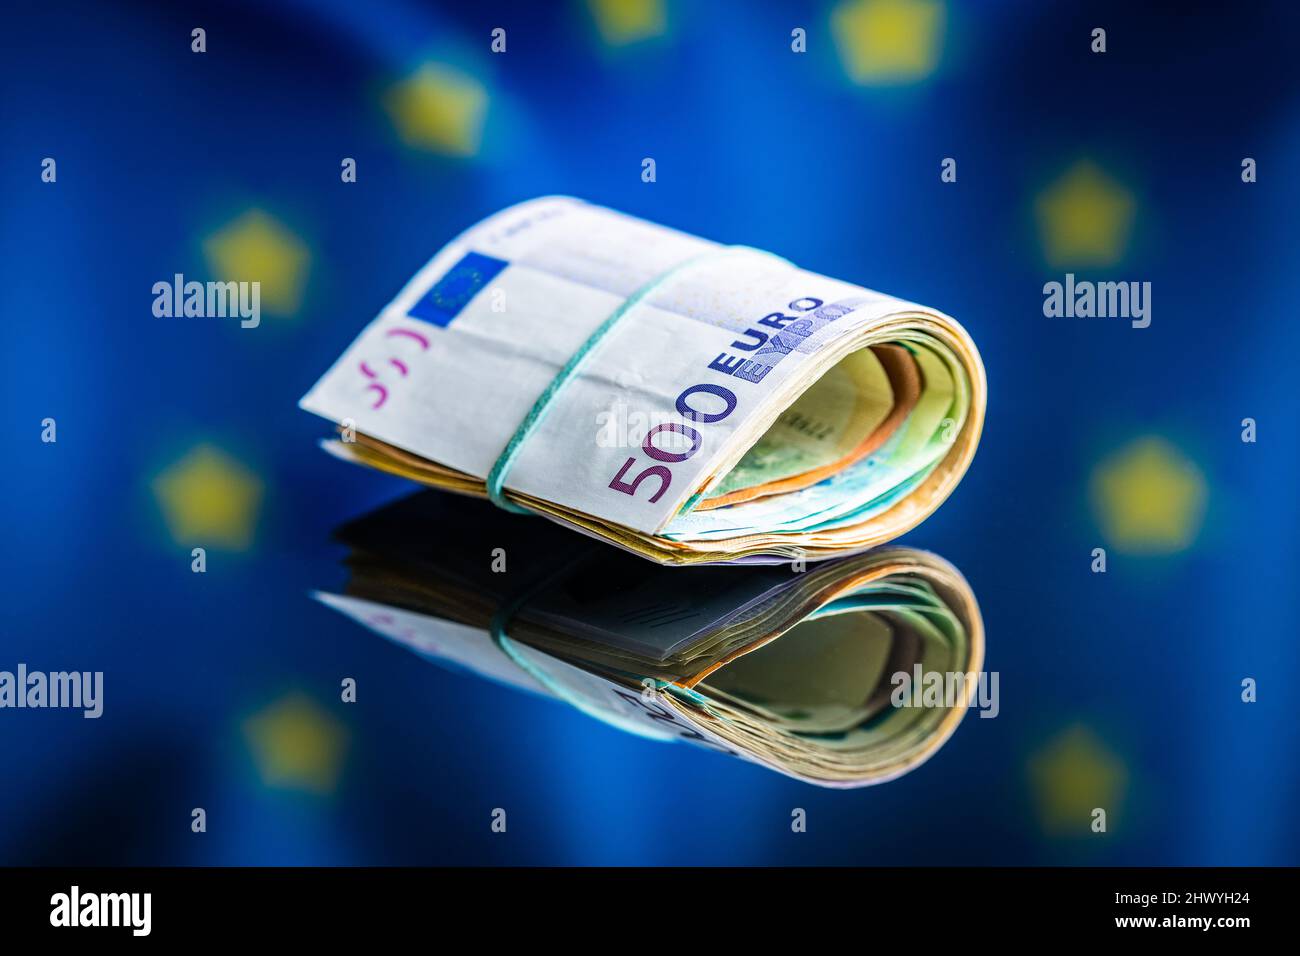 Euro banknotes in front of Europe union flag. The paper European currency. Stock Photo